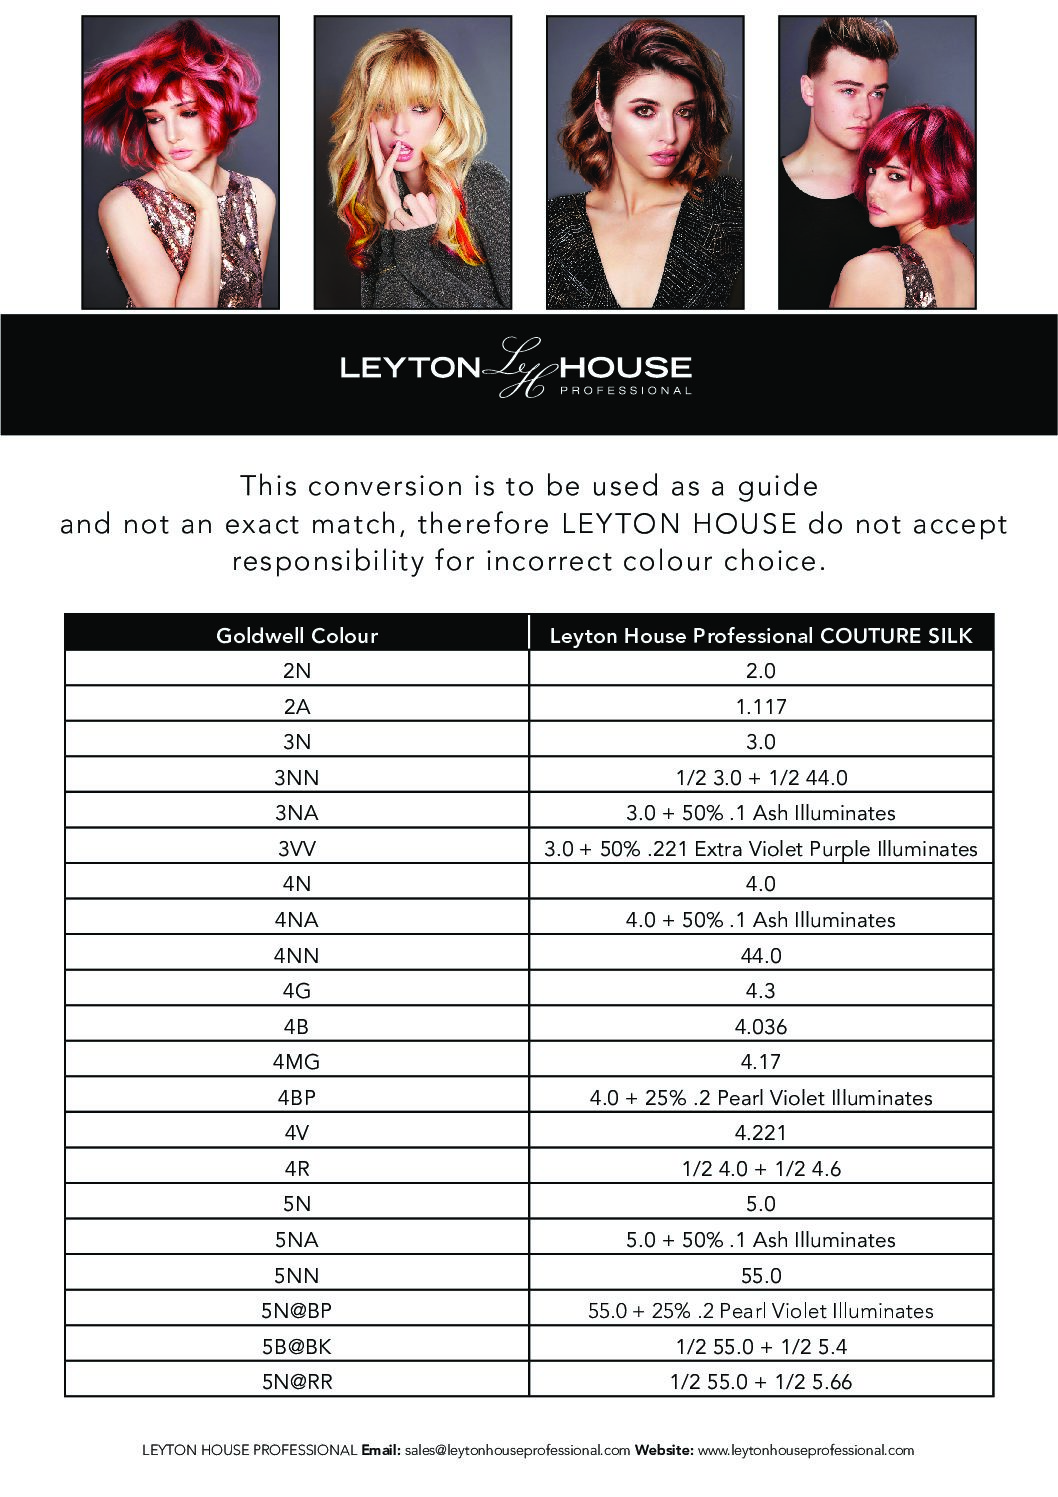 goldwell-conversion-chart-the-warehouse-online